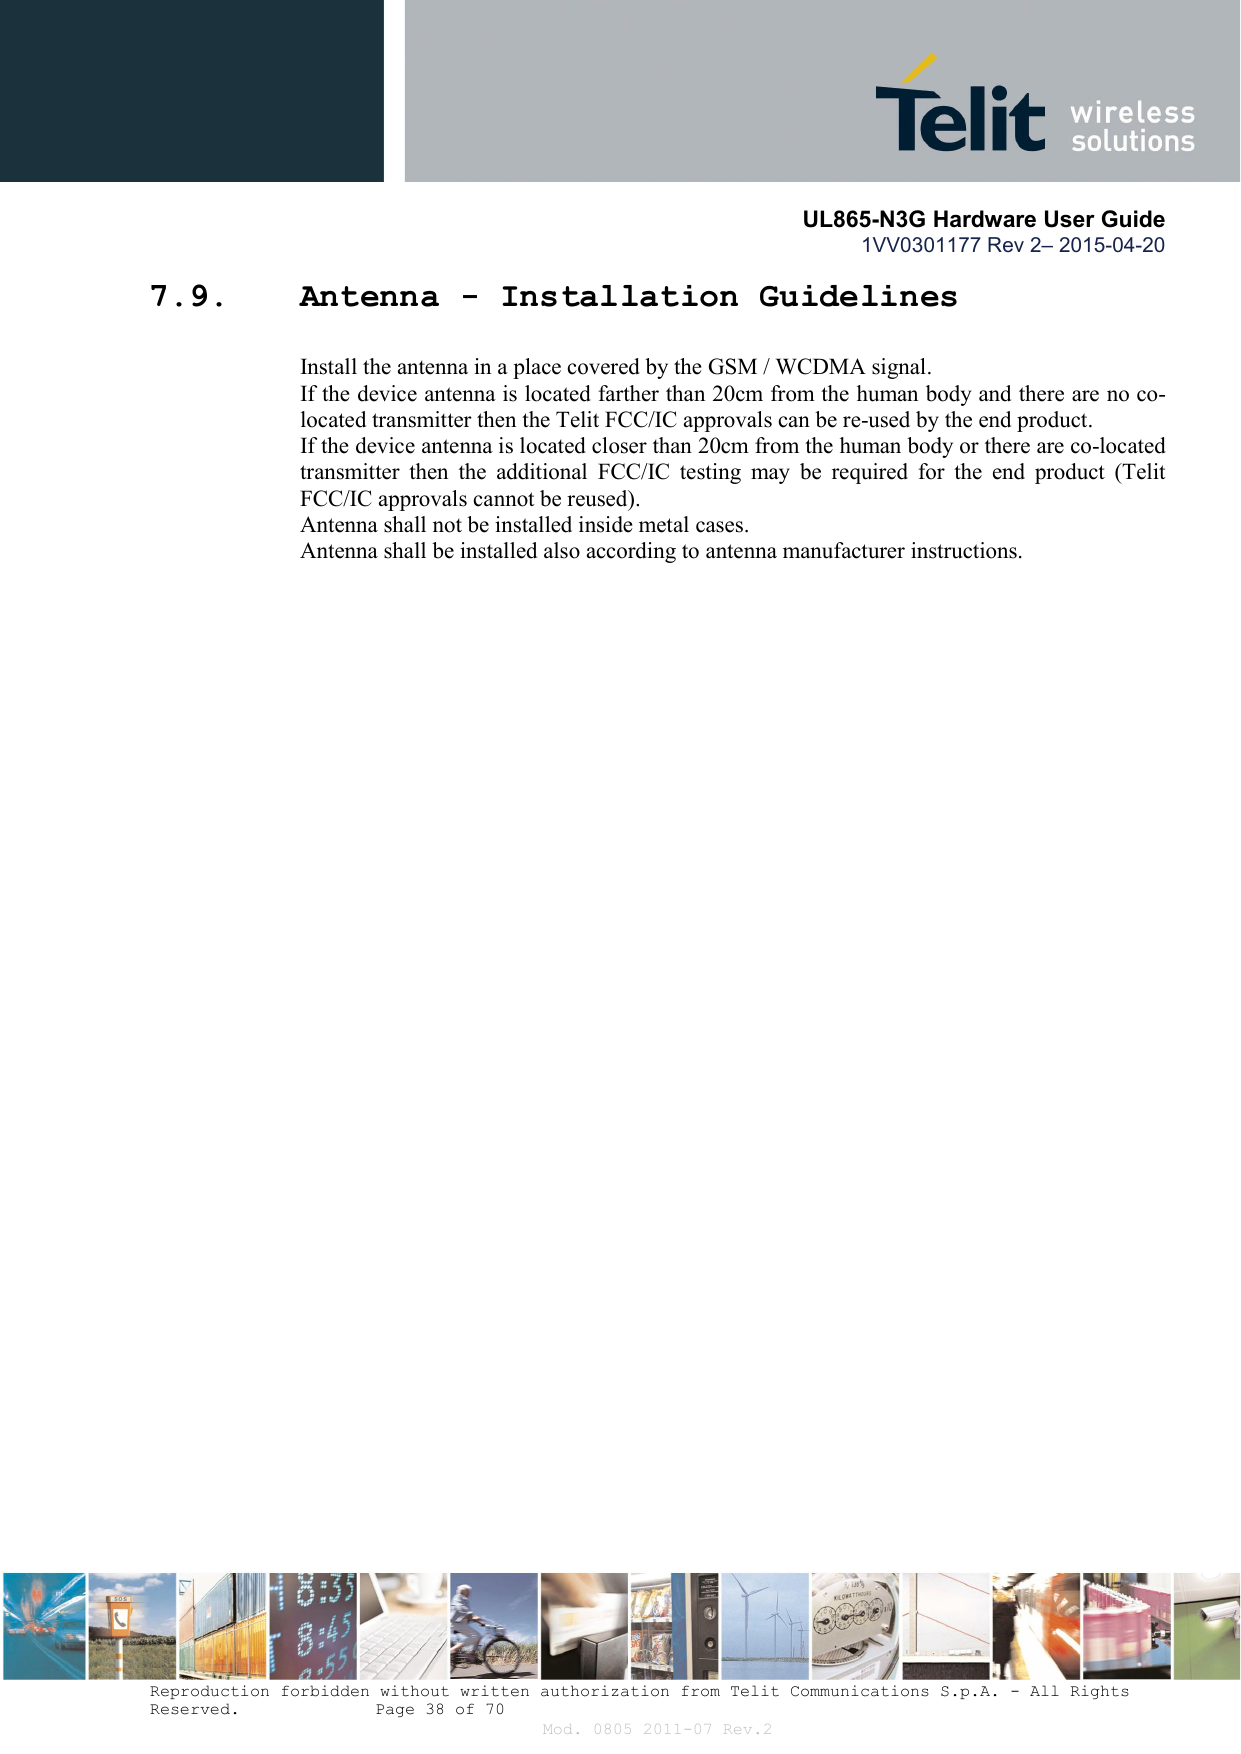       UL865-N3G Hardware User Guide 1VV0301177 Rev 2– 2015-04-20  Reproduction forbidden without written authorization from Telit Communications S.p.A. - All Rights Reserved.    Page 38 of 70 Mod. 0805 2011-07 Rev.2 7.9. Antenna - Installation Guidelines Install the antenna in a place covered by the GSM / WCDMA signal. If the device antenna is located farther than 20cm from the human body and there are no co-located transmitter then the Telit FCC/IC approvals can be re-used by the end product.  If the device antenna is located closer than 20cm from the human body or there are co-located transmitter  then  the  additional  FCC/IC  testing  may  be  required  for  the  end  product  (Telit FCC/IC approvals cannot be reused). Antenna shall not be installed inside metal cases. Antenna shall be installed also according to antenna manufacturer instructions.    